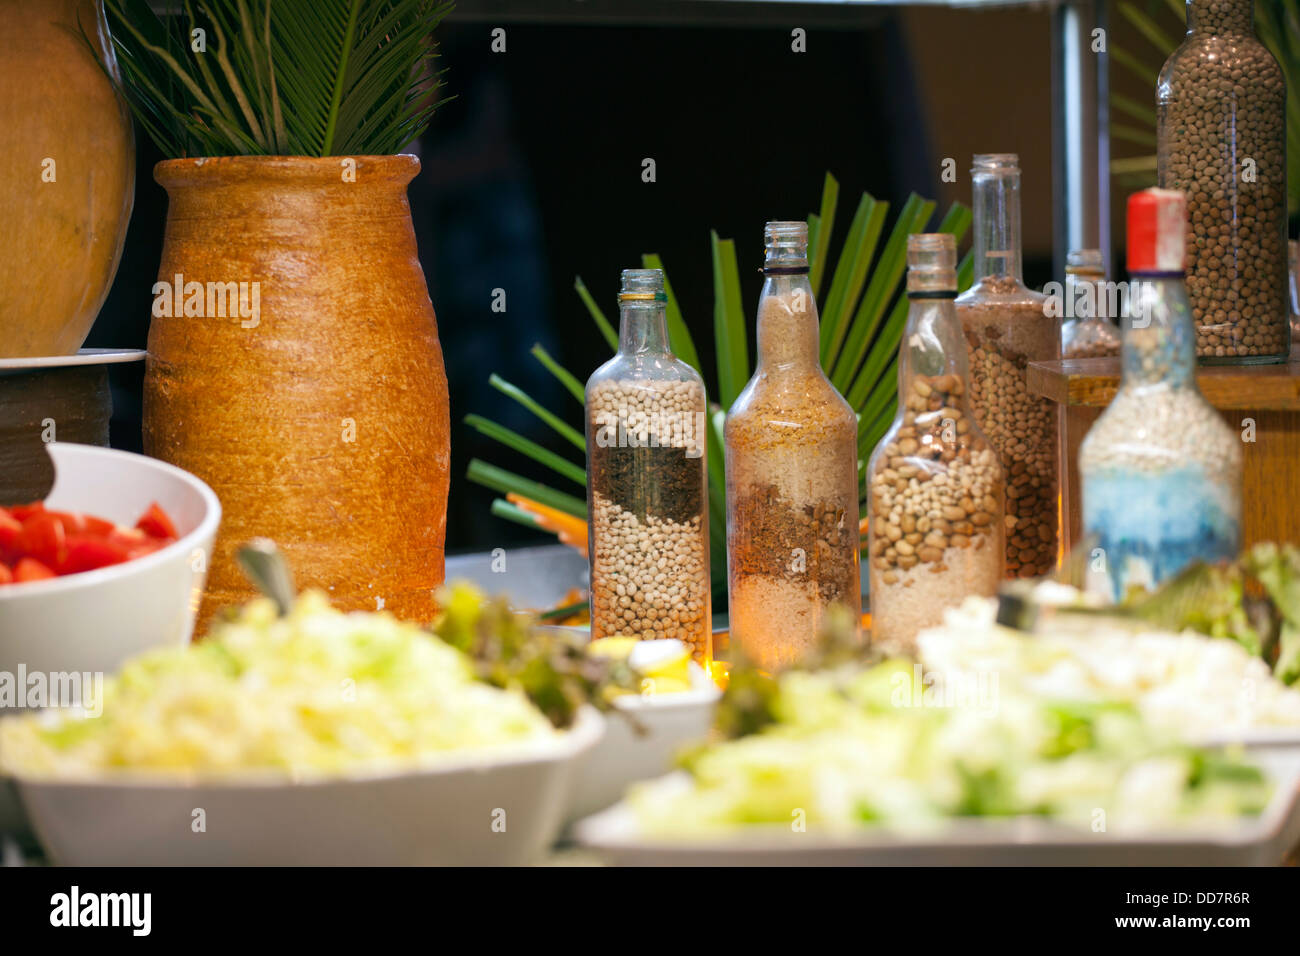 Shallow focus image of Egyptian salad and bottles of condaments Stock Photo